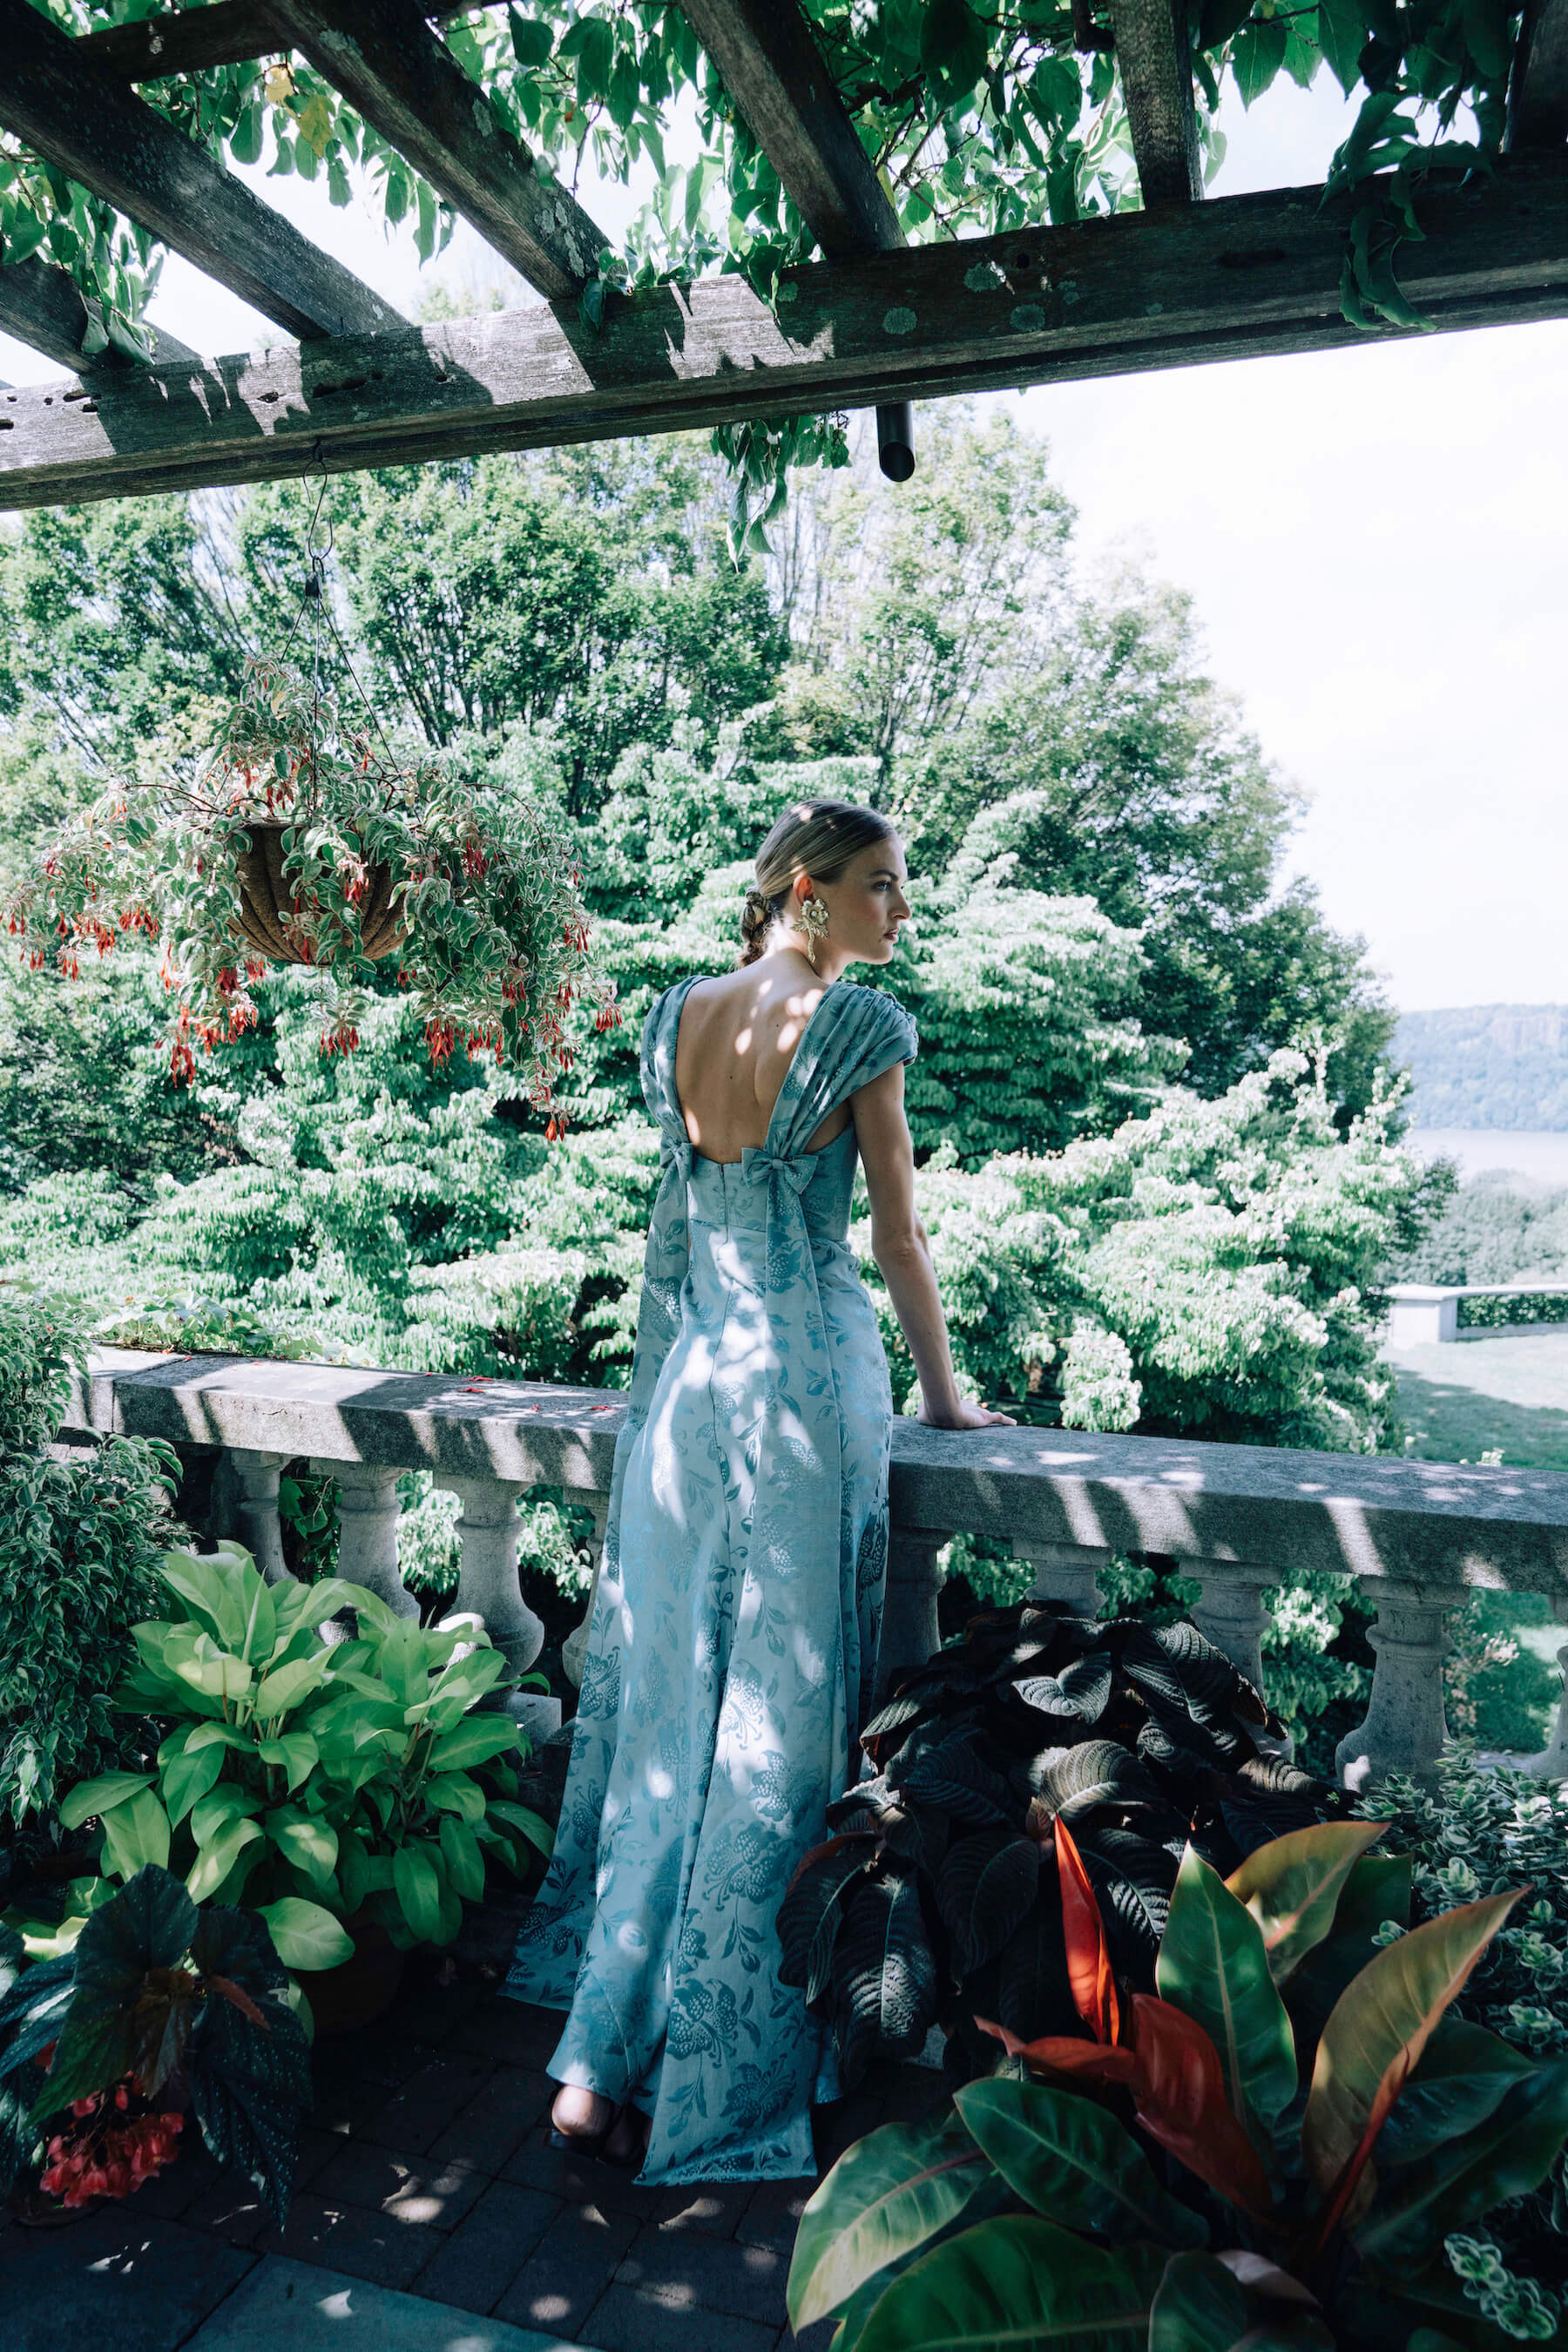 Florence Teal Floral Jacquard Gown With Arm Trains